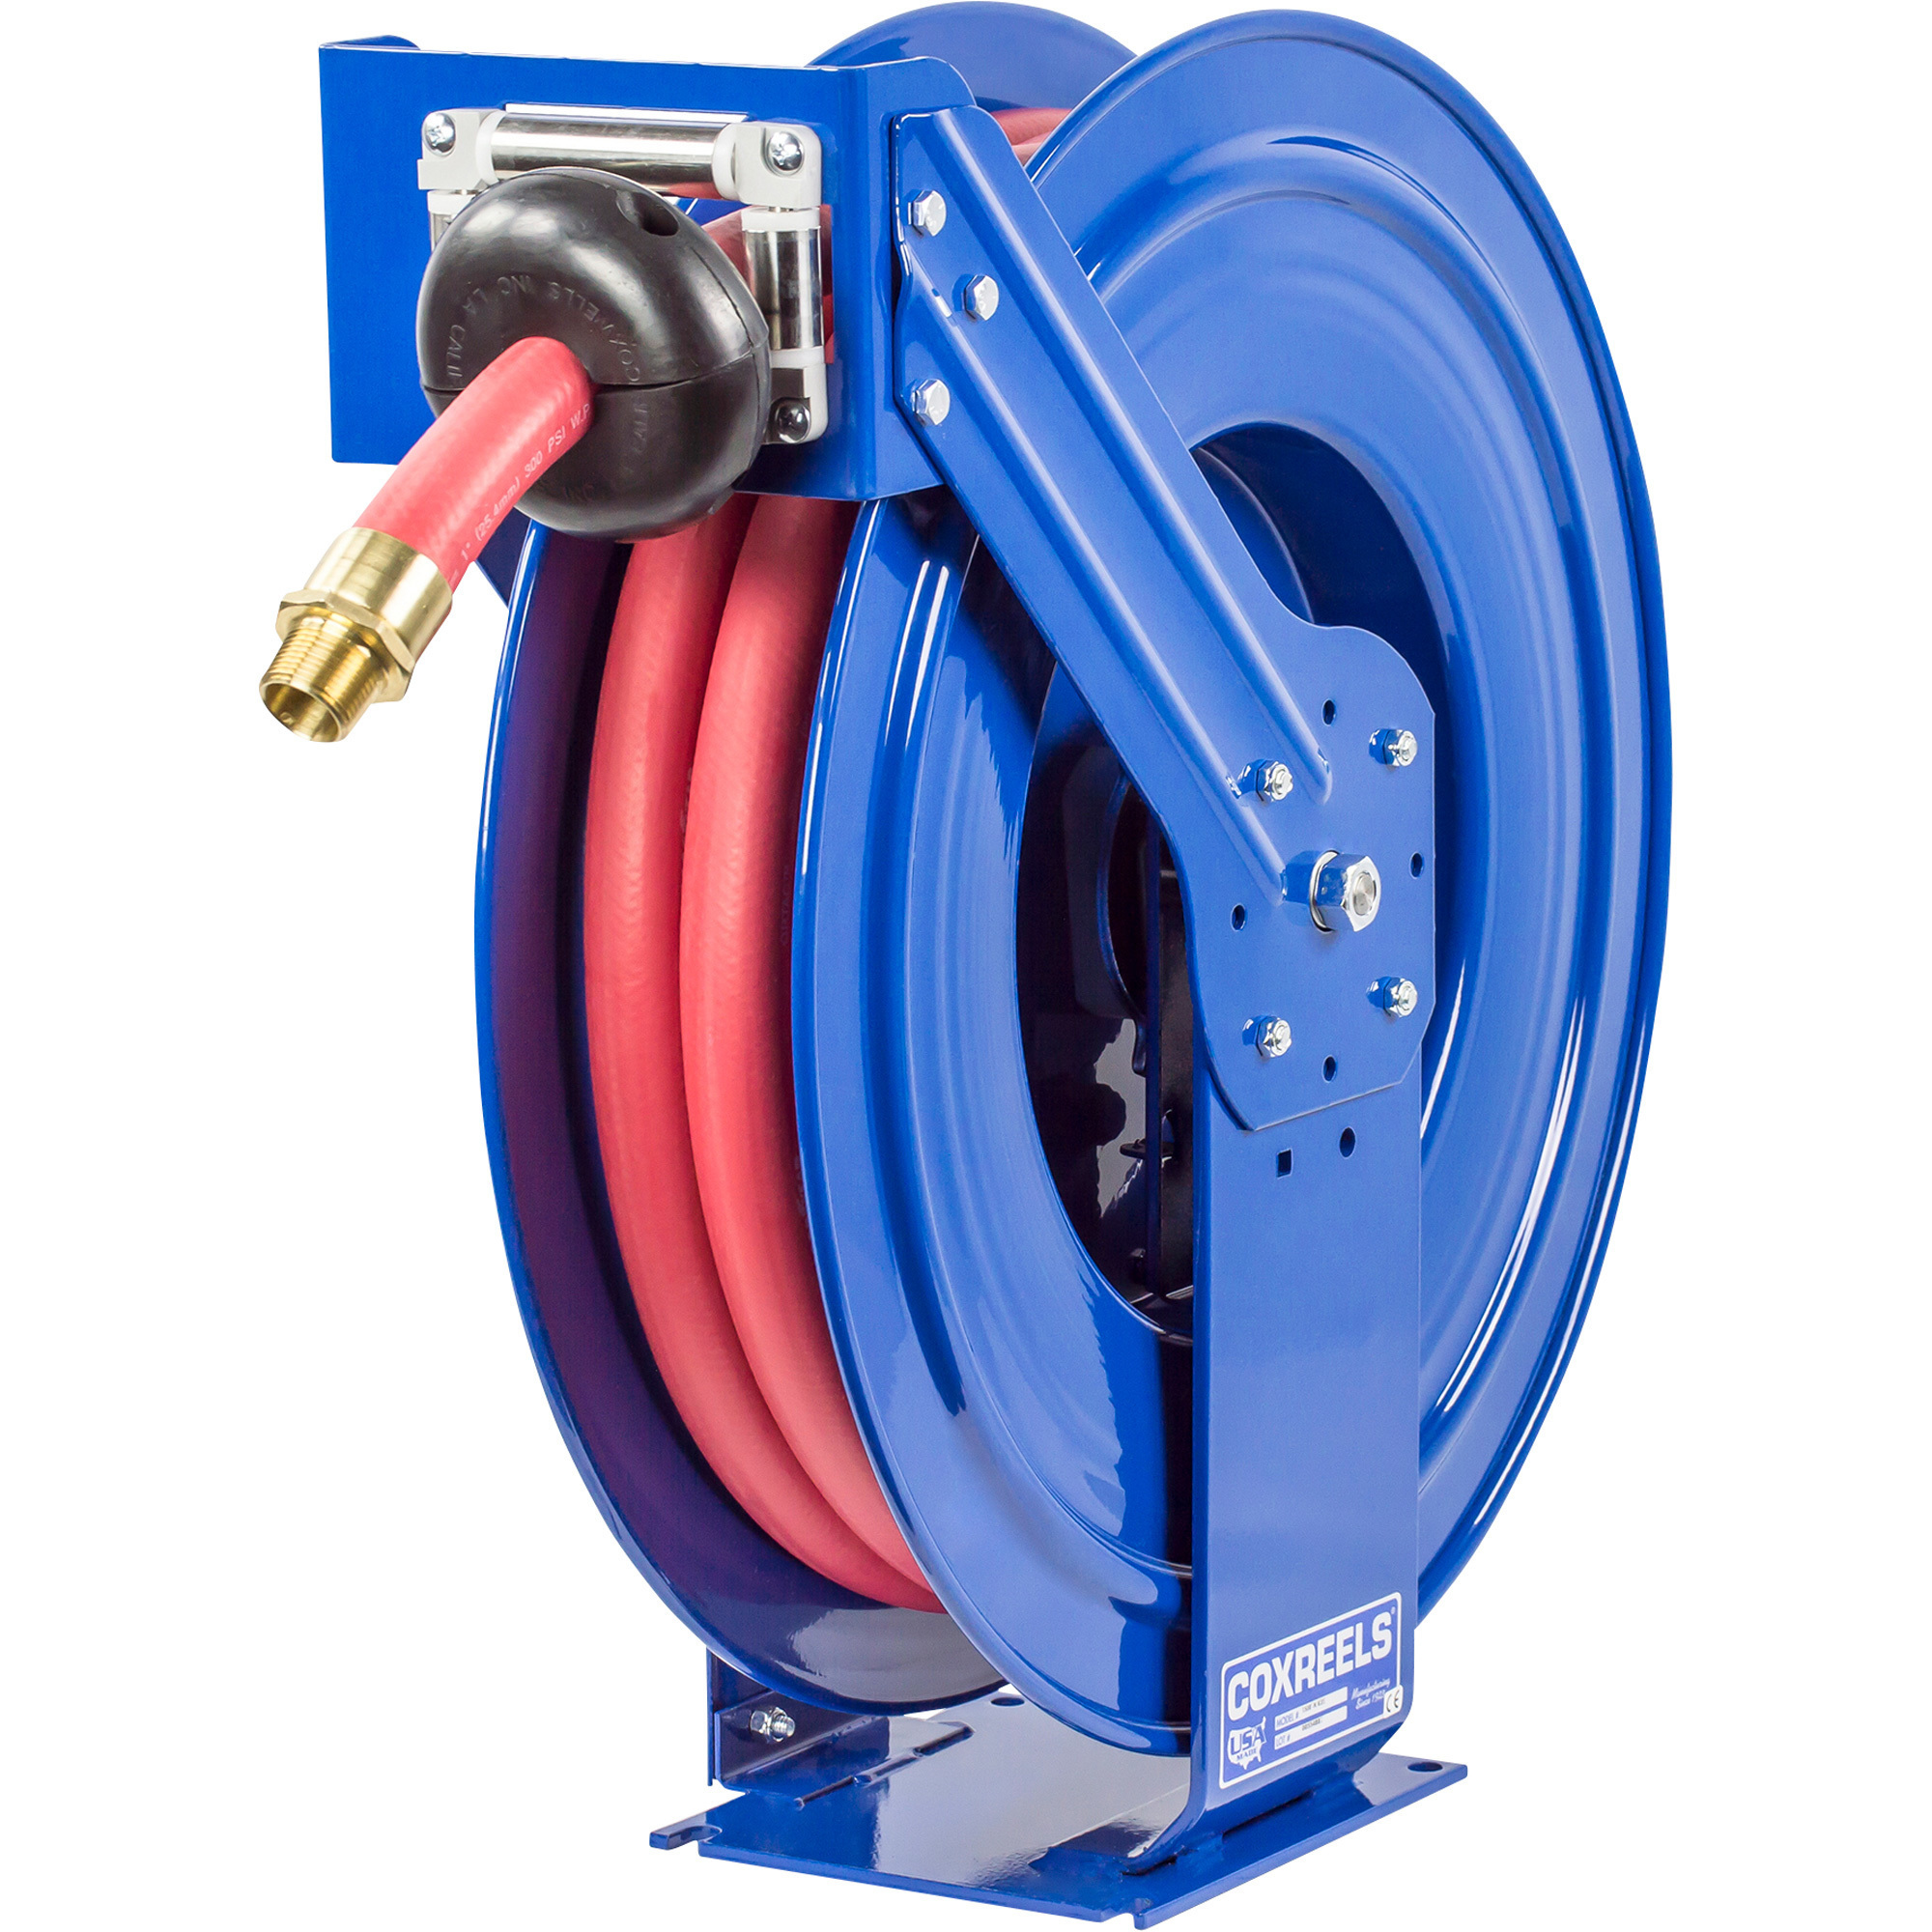 Coxreels Spring-Driven Supreme Duty Fuel Hose Reel, With 1Inch x 50ft. Hose, Max. 300 PSI, Model TSHF-N-650